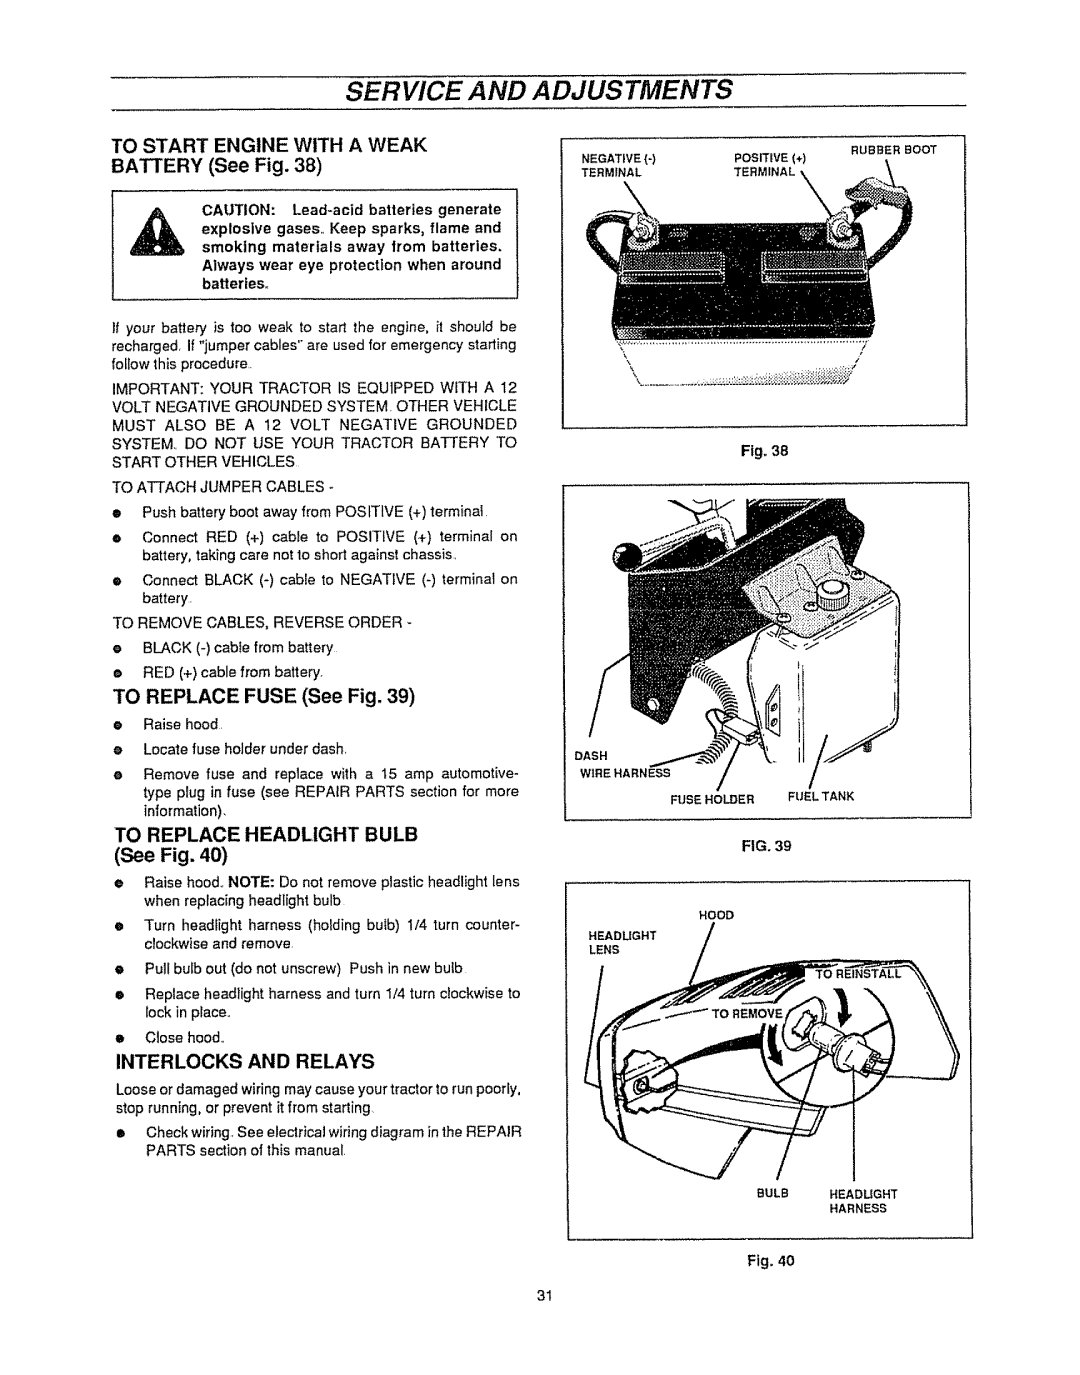 Sears 536.25587 owner manual Service And Adjustments, To Start Engine With A Weak, BATTERY See Fig, TO REPLACE FUSE See Fig 